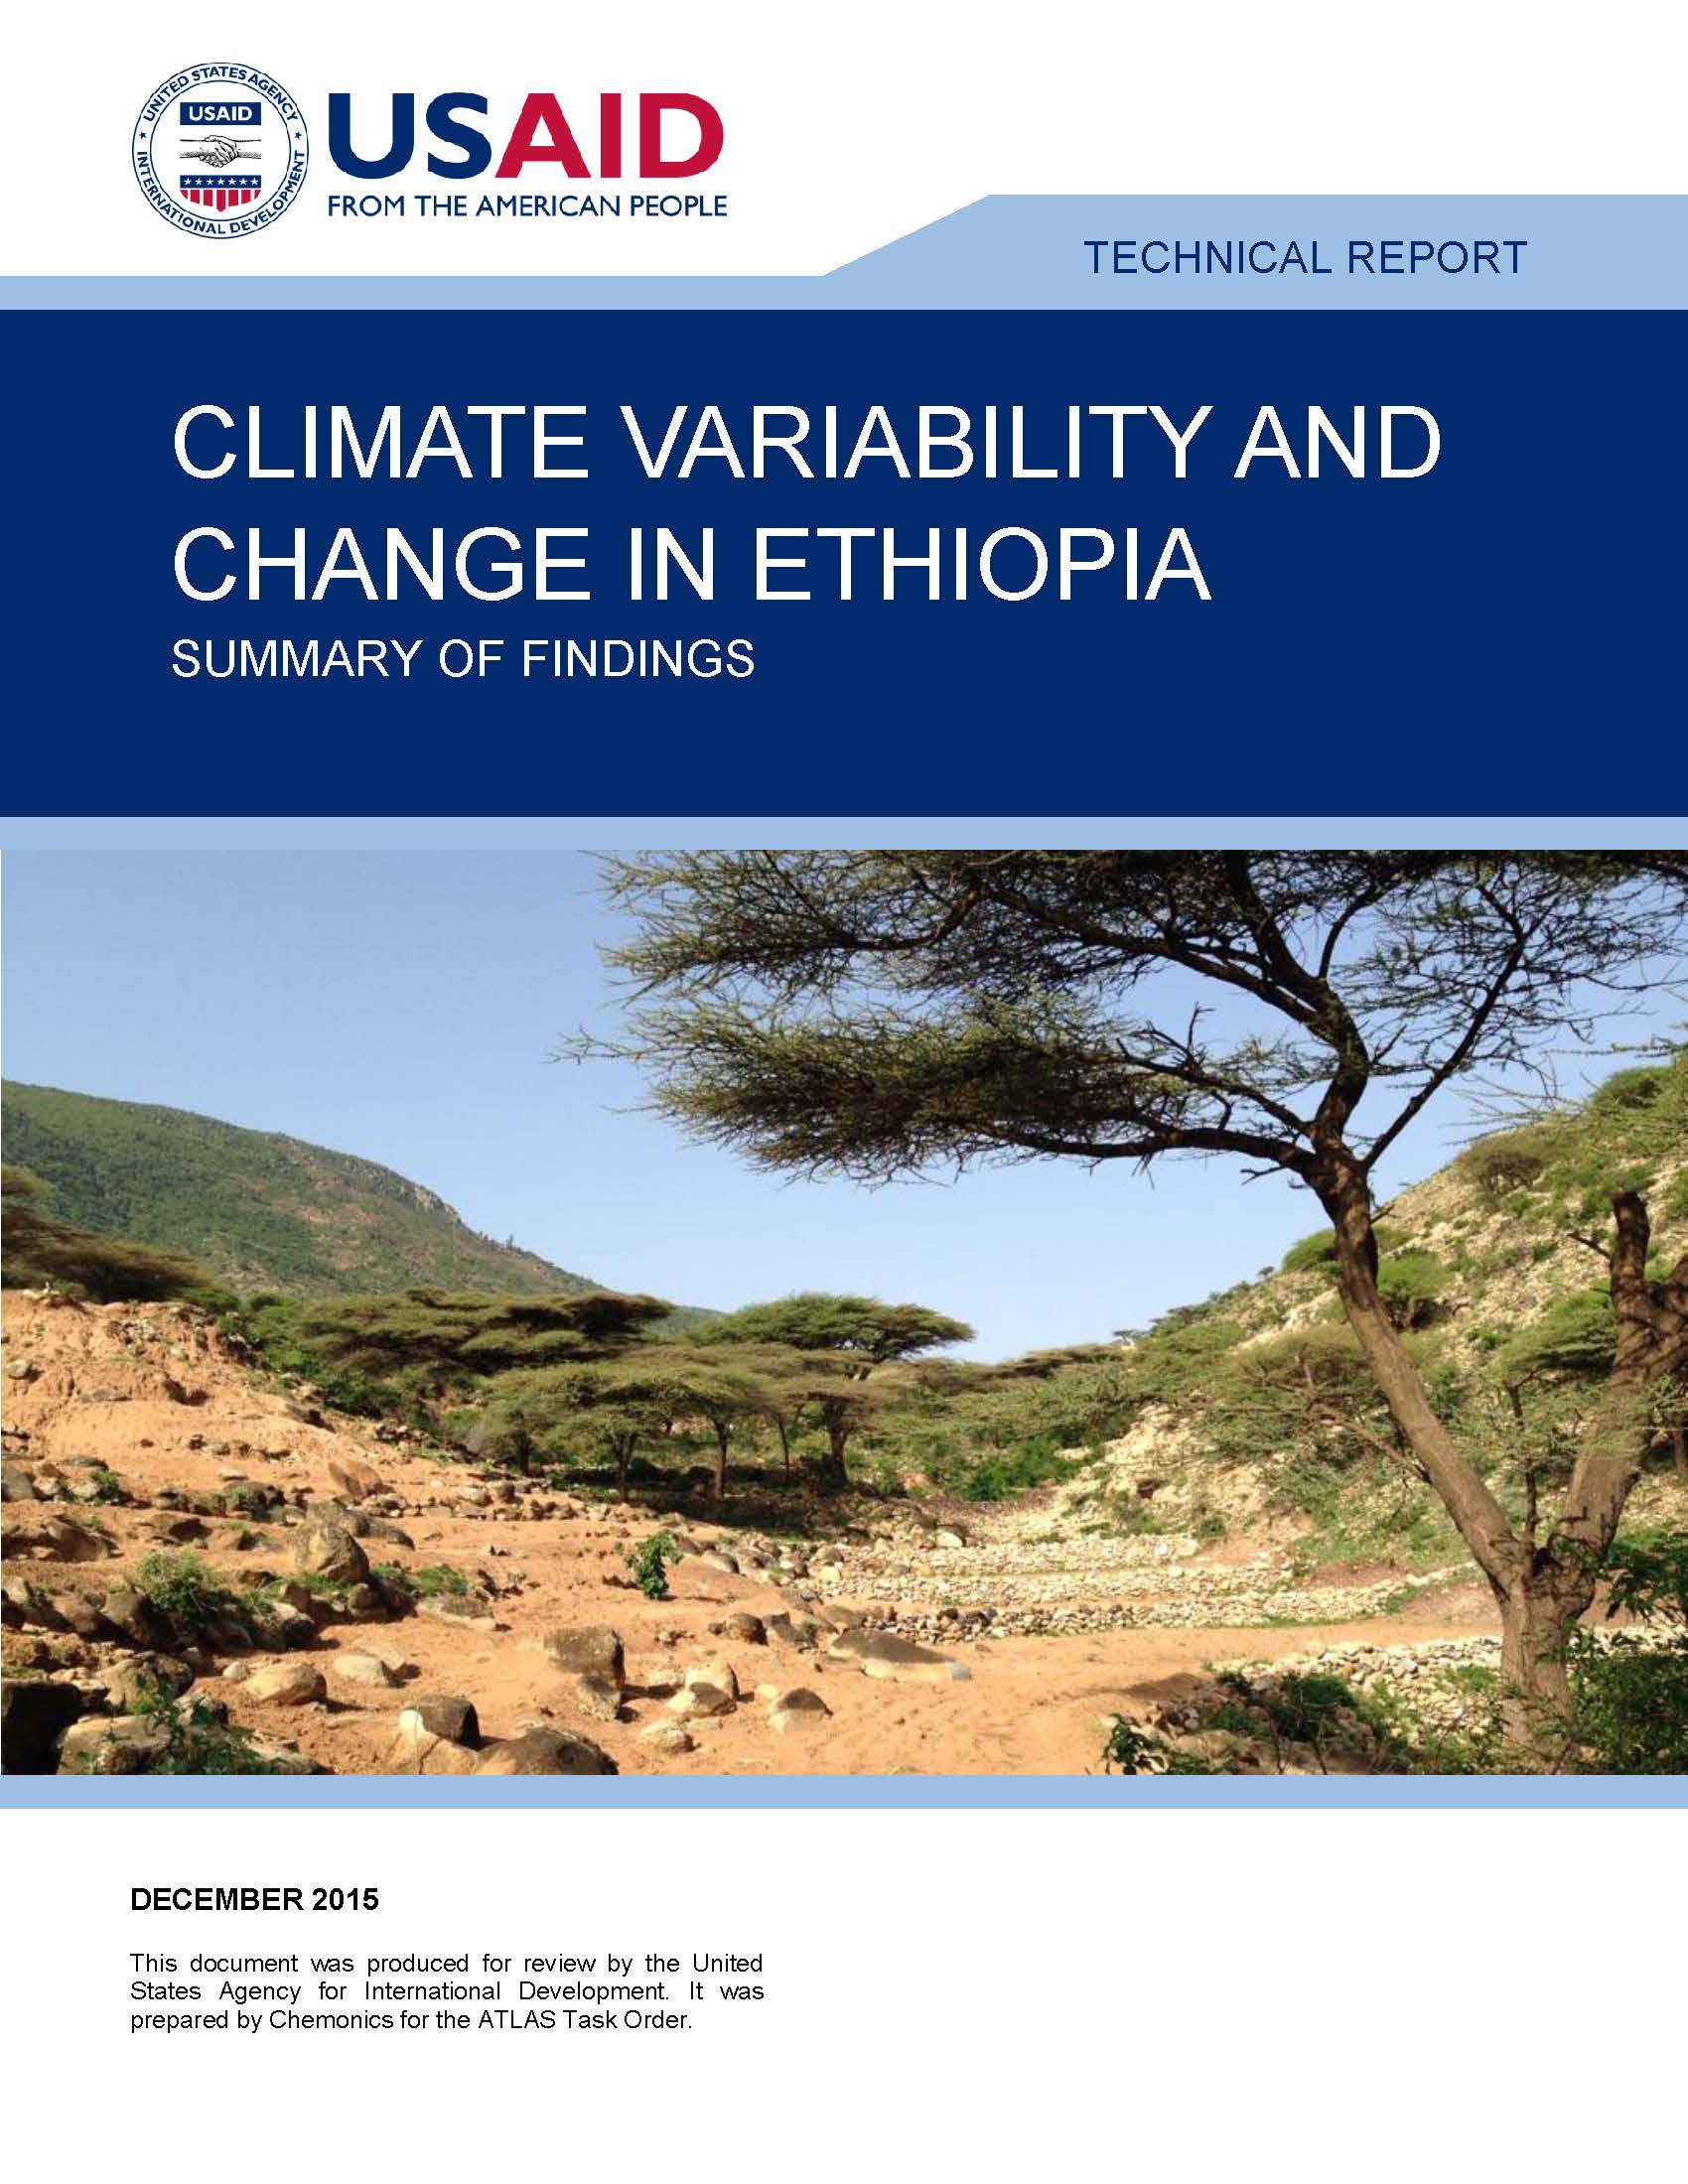 Climate Variability and Change in Ethiopia